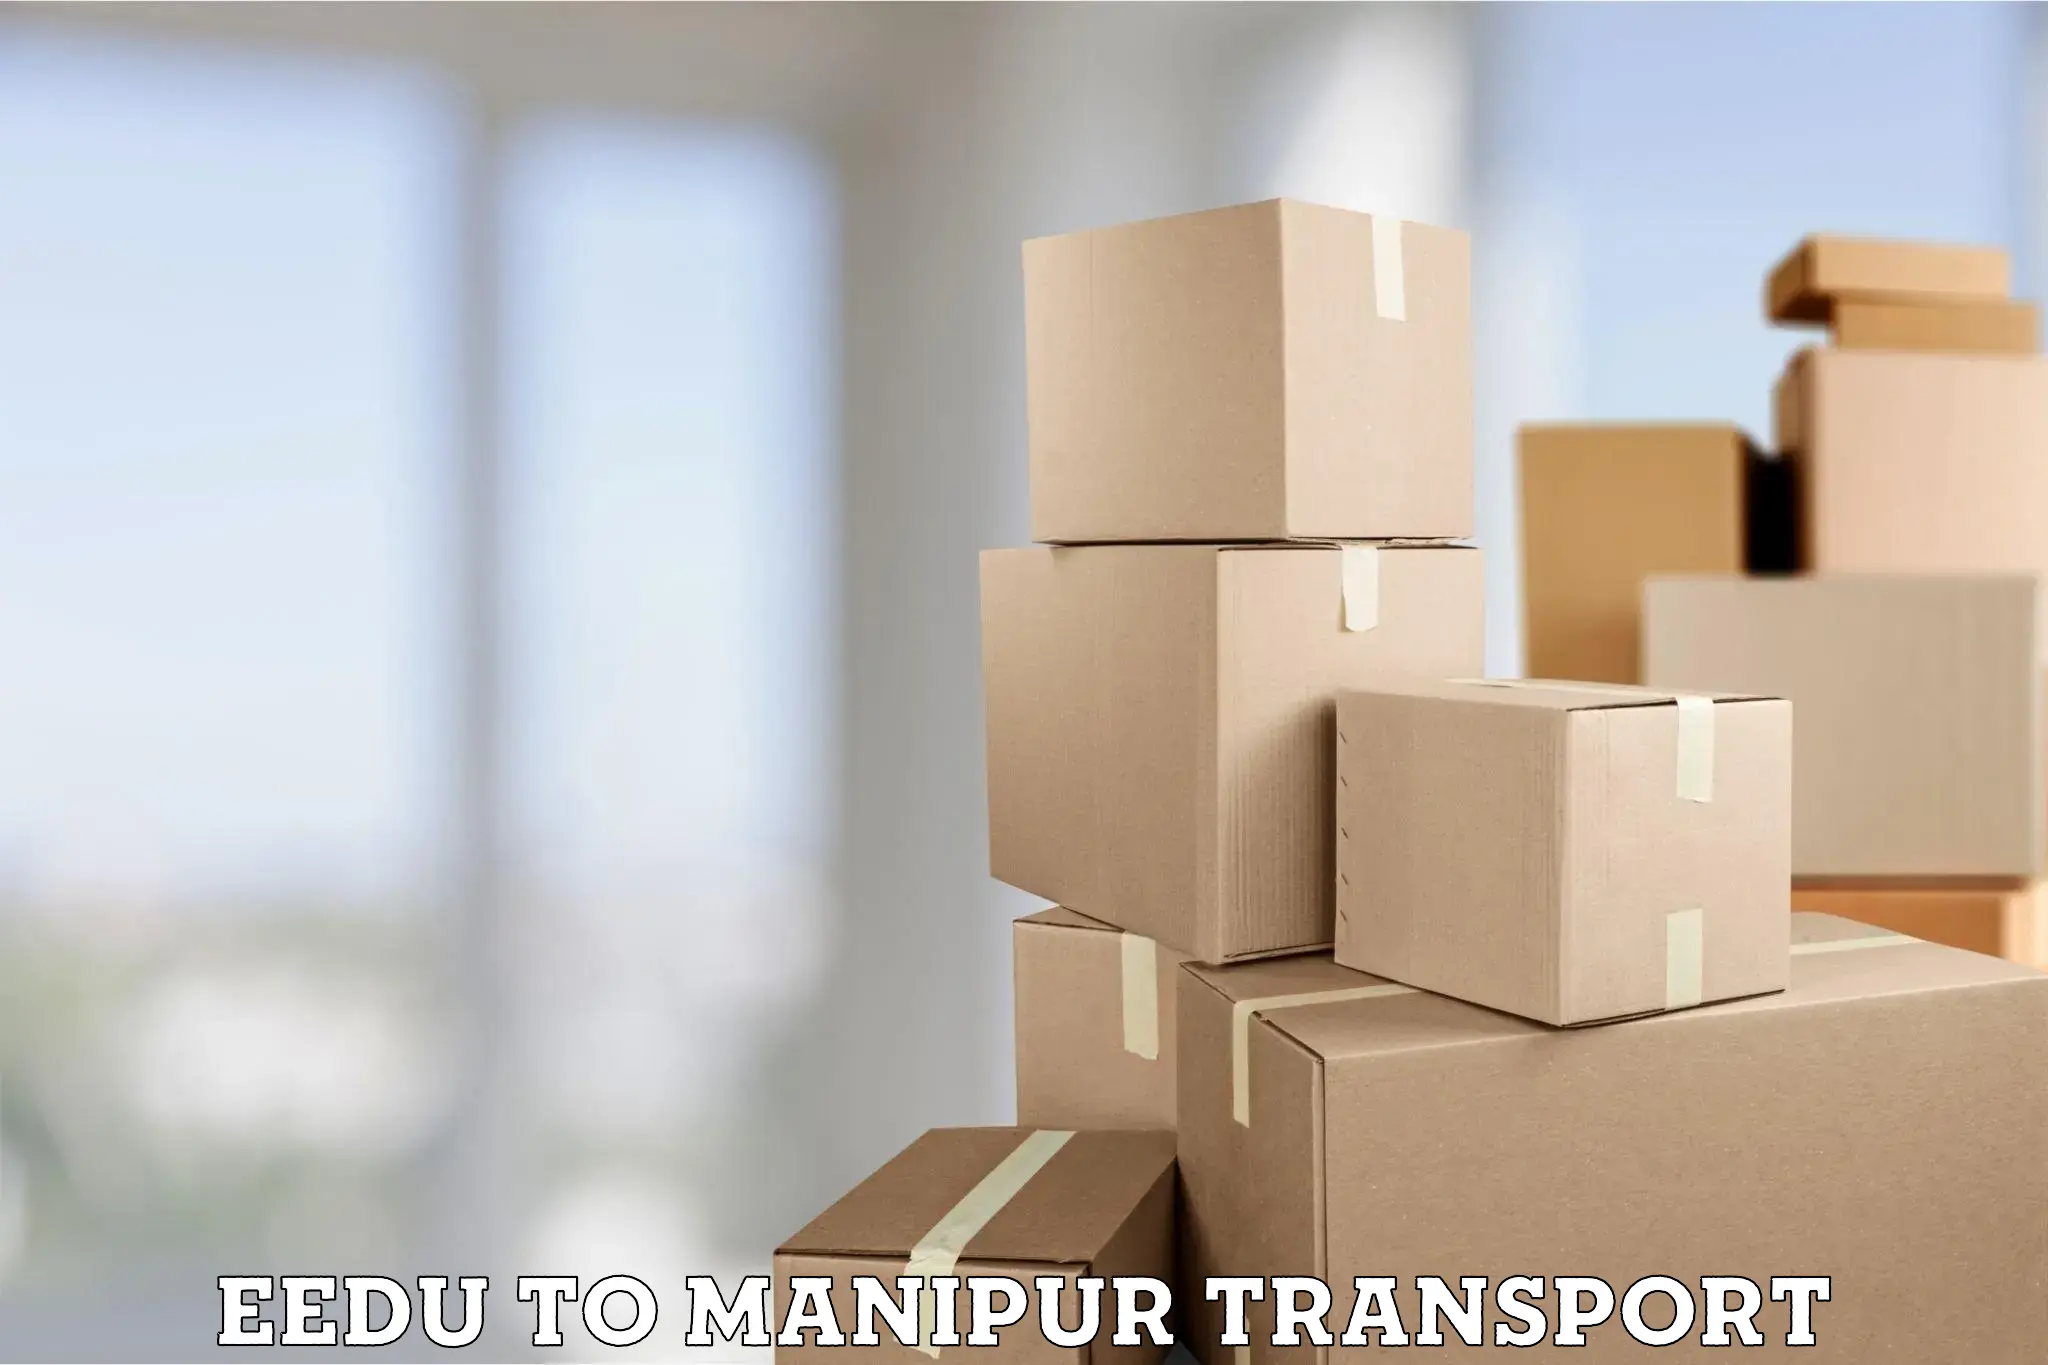 All India transport service Eedu to Manipur